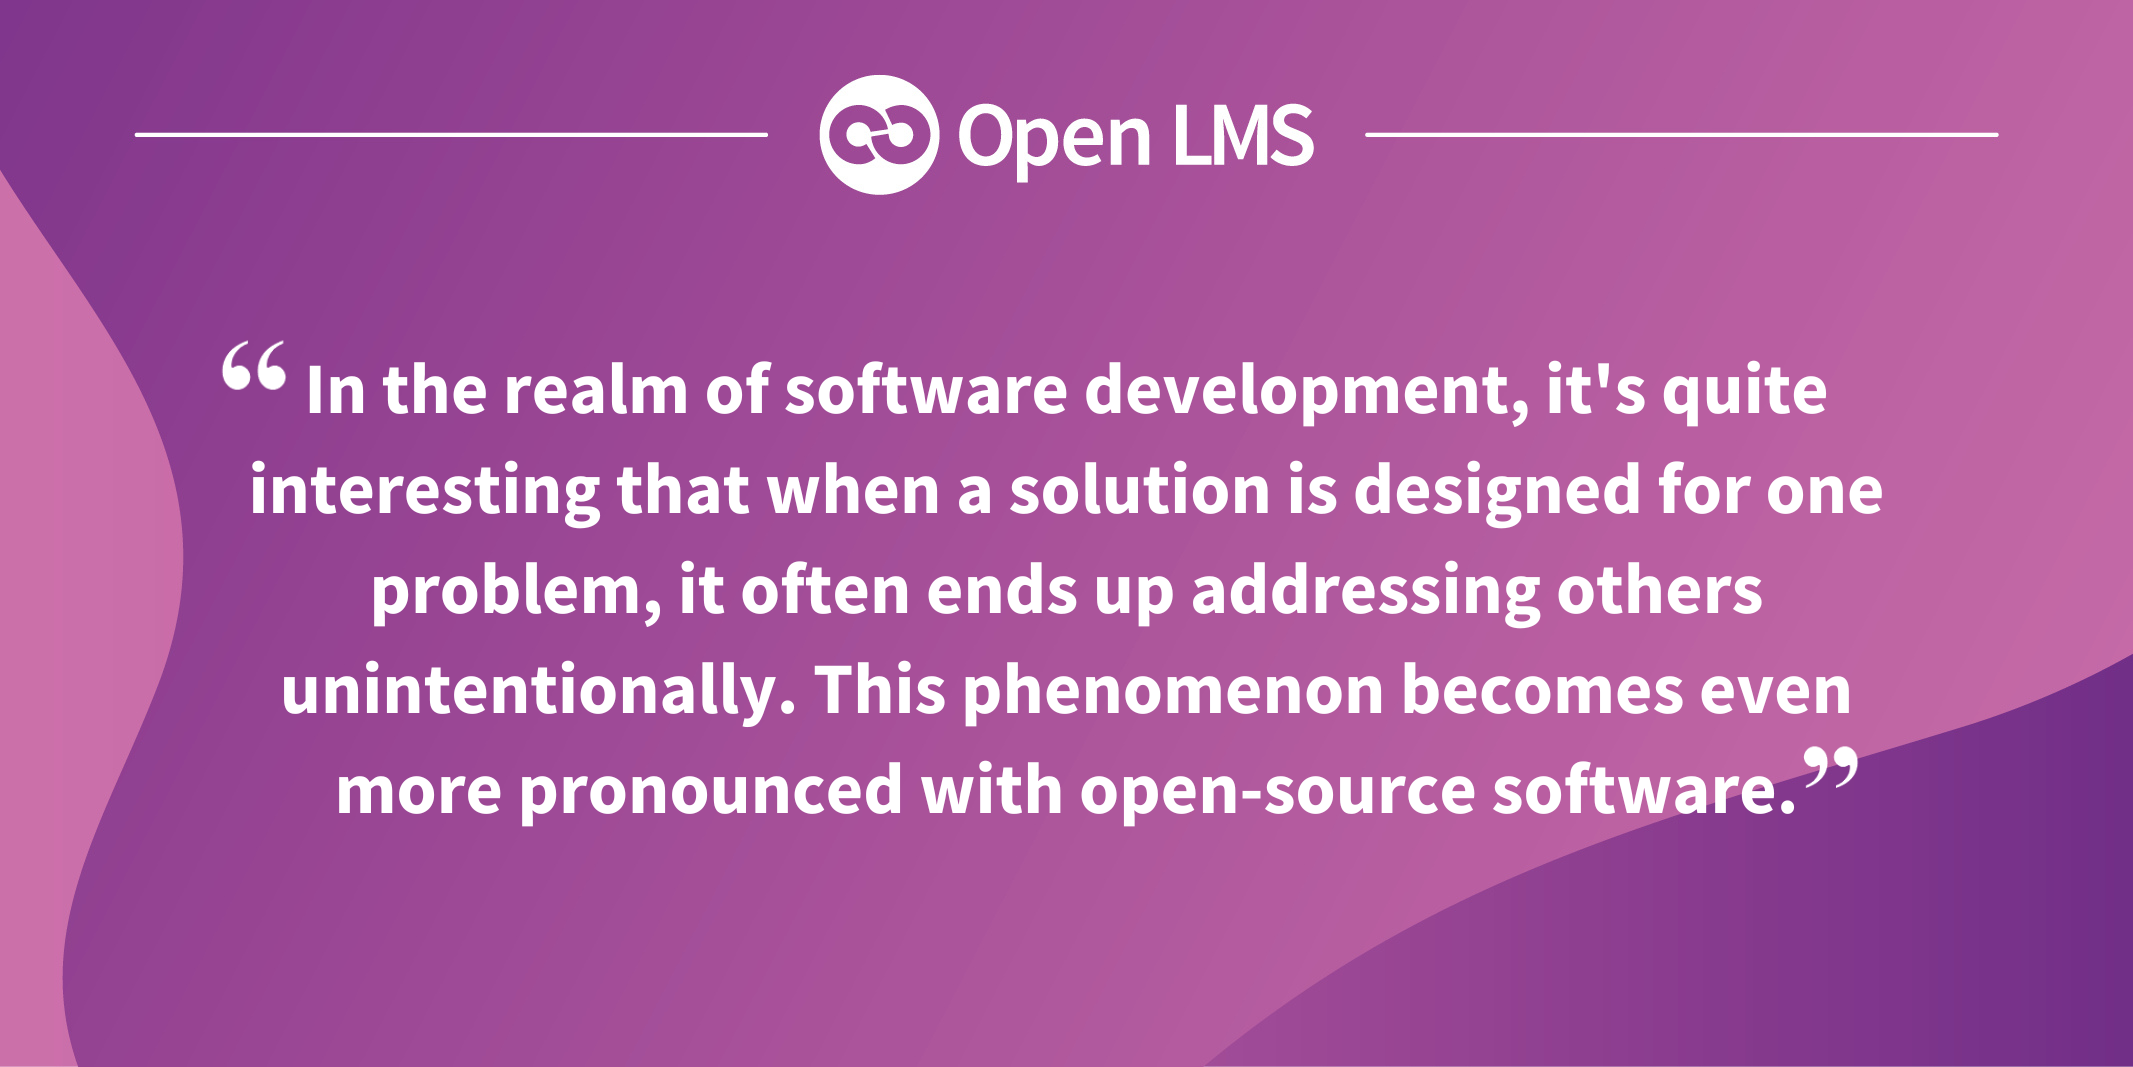 In the realm of software development, it's quite interesting that when a solution is designed for one problem, it often ends up addressing others unintentionally. This phenomenon becomes even more pronounced with open-source software.